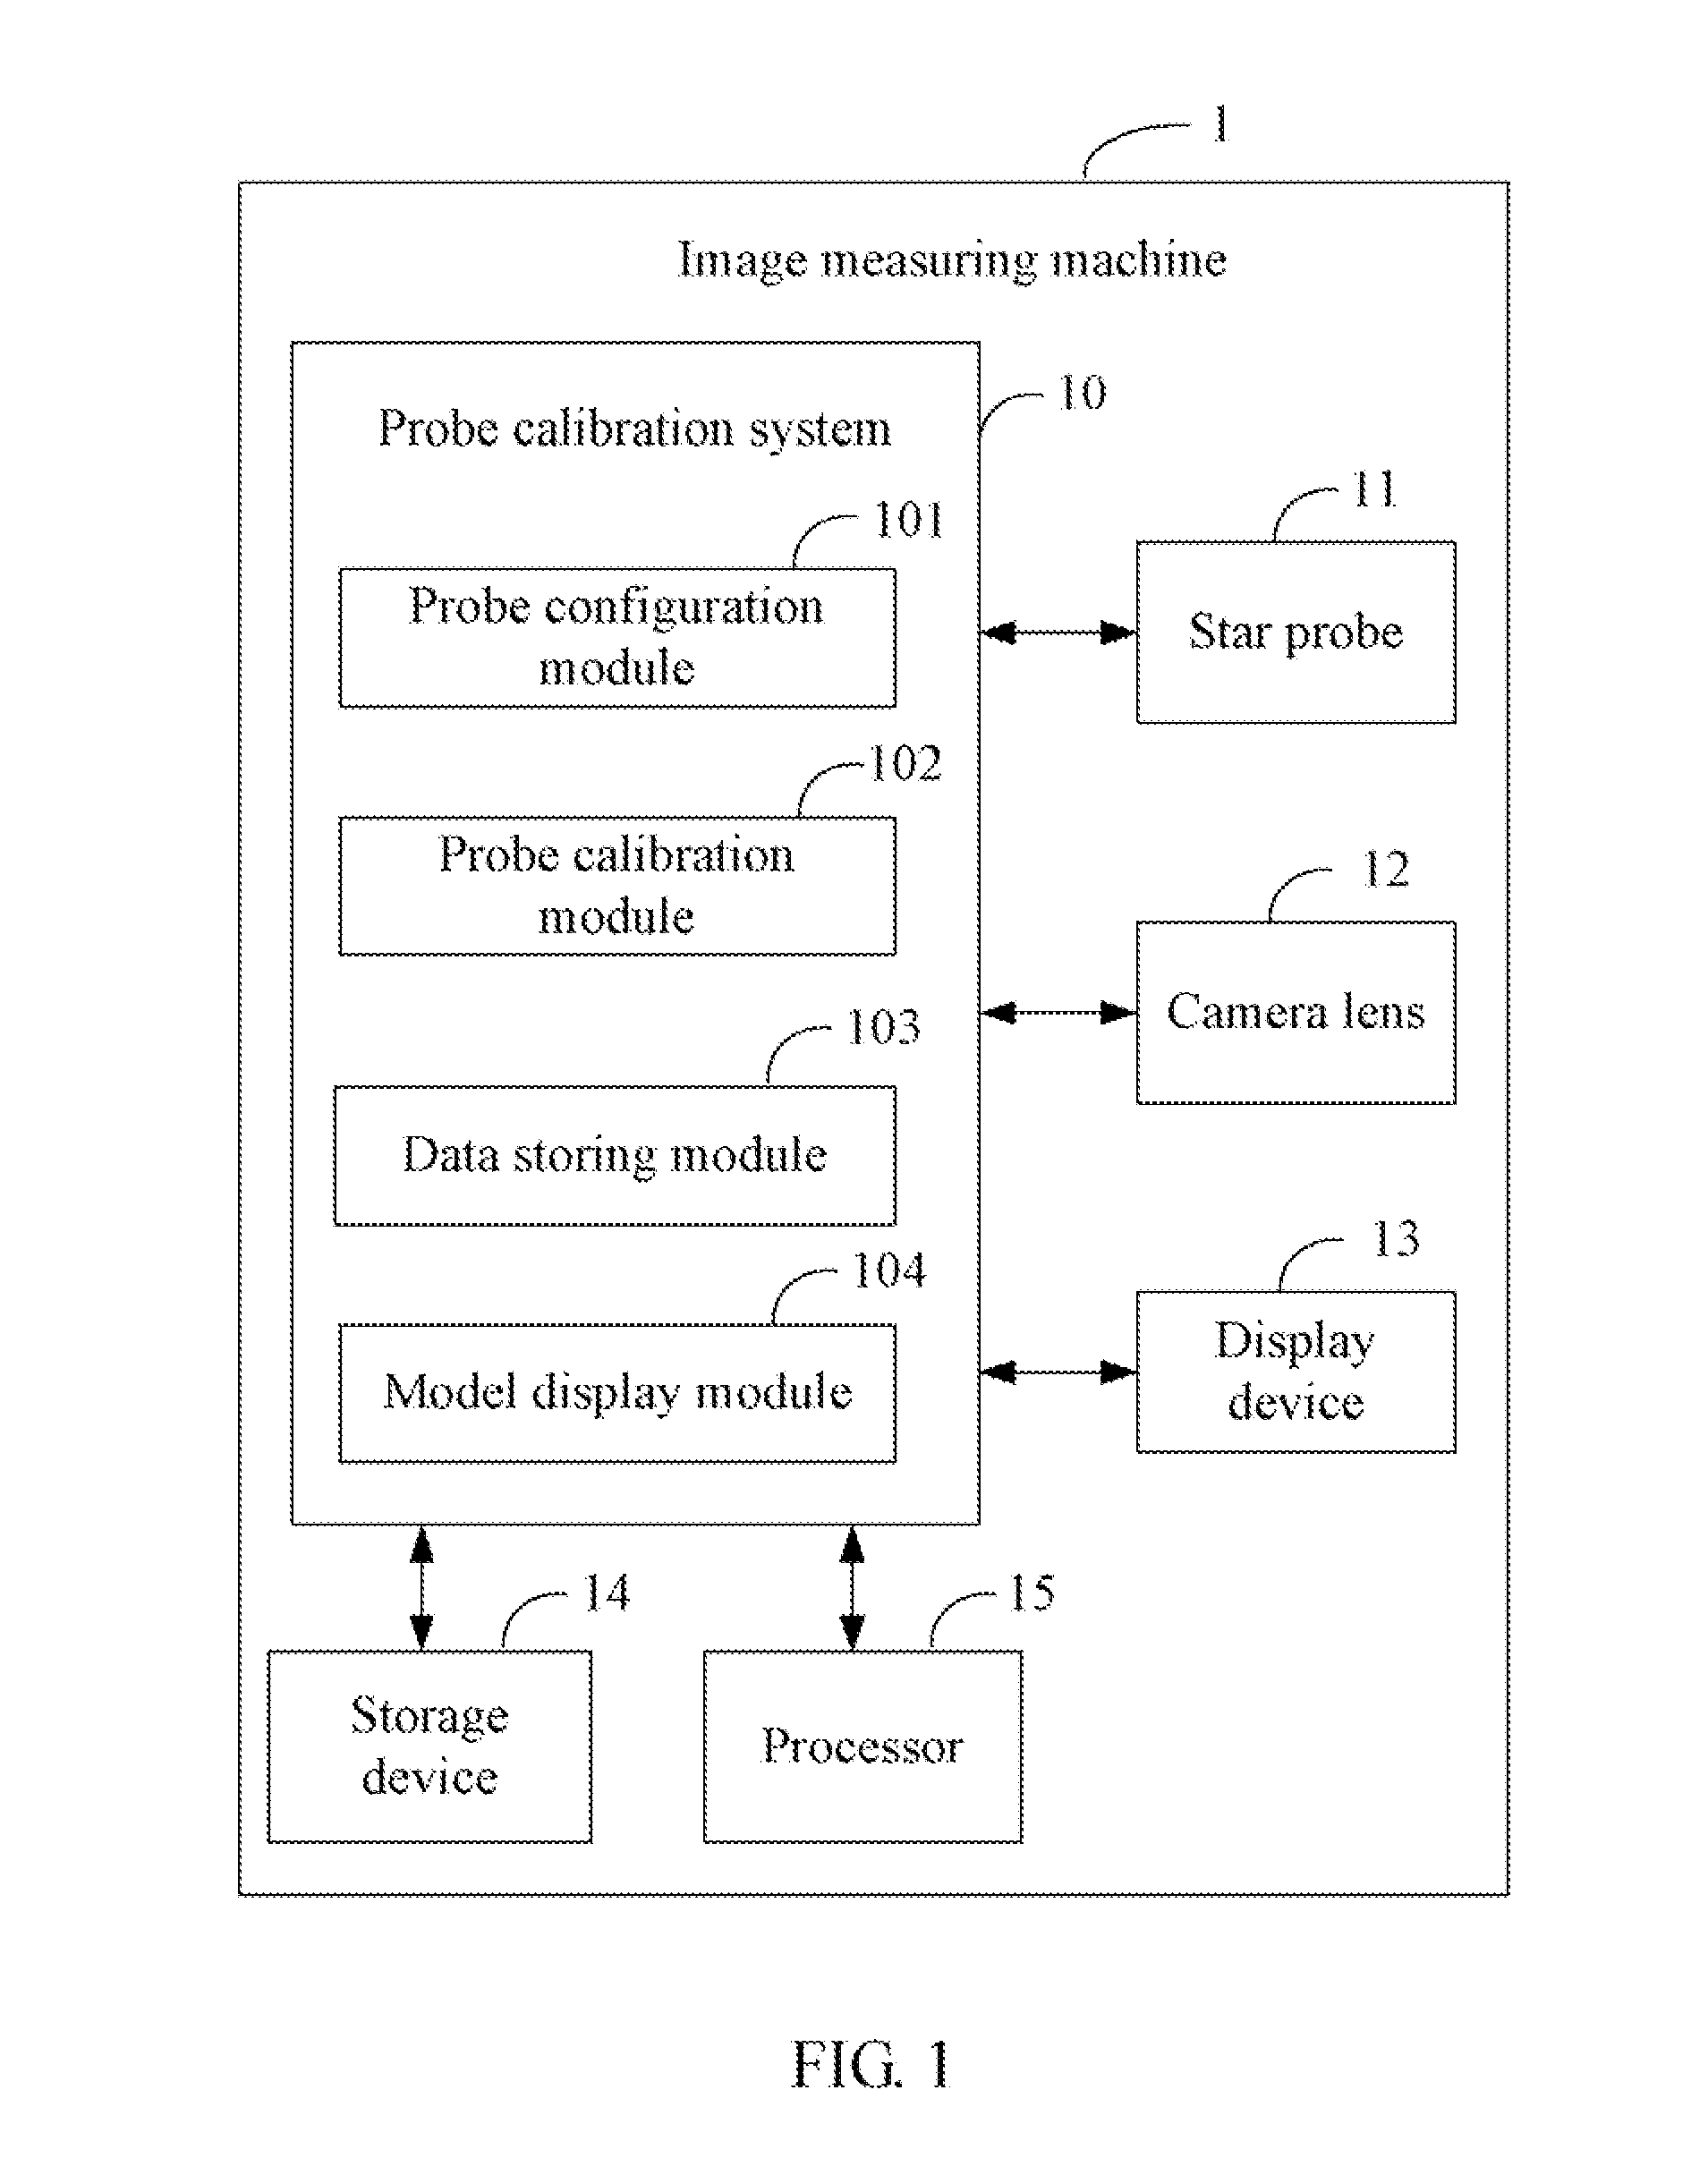 Computing device and method for calibrating star probe of image measuring machine